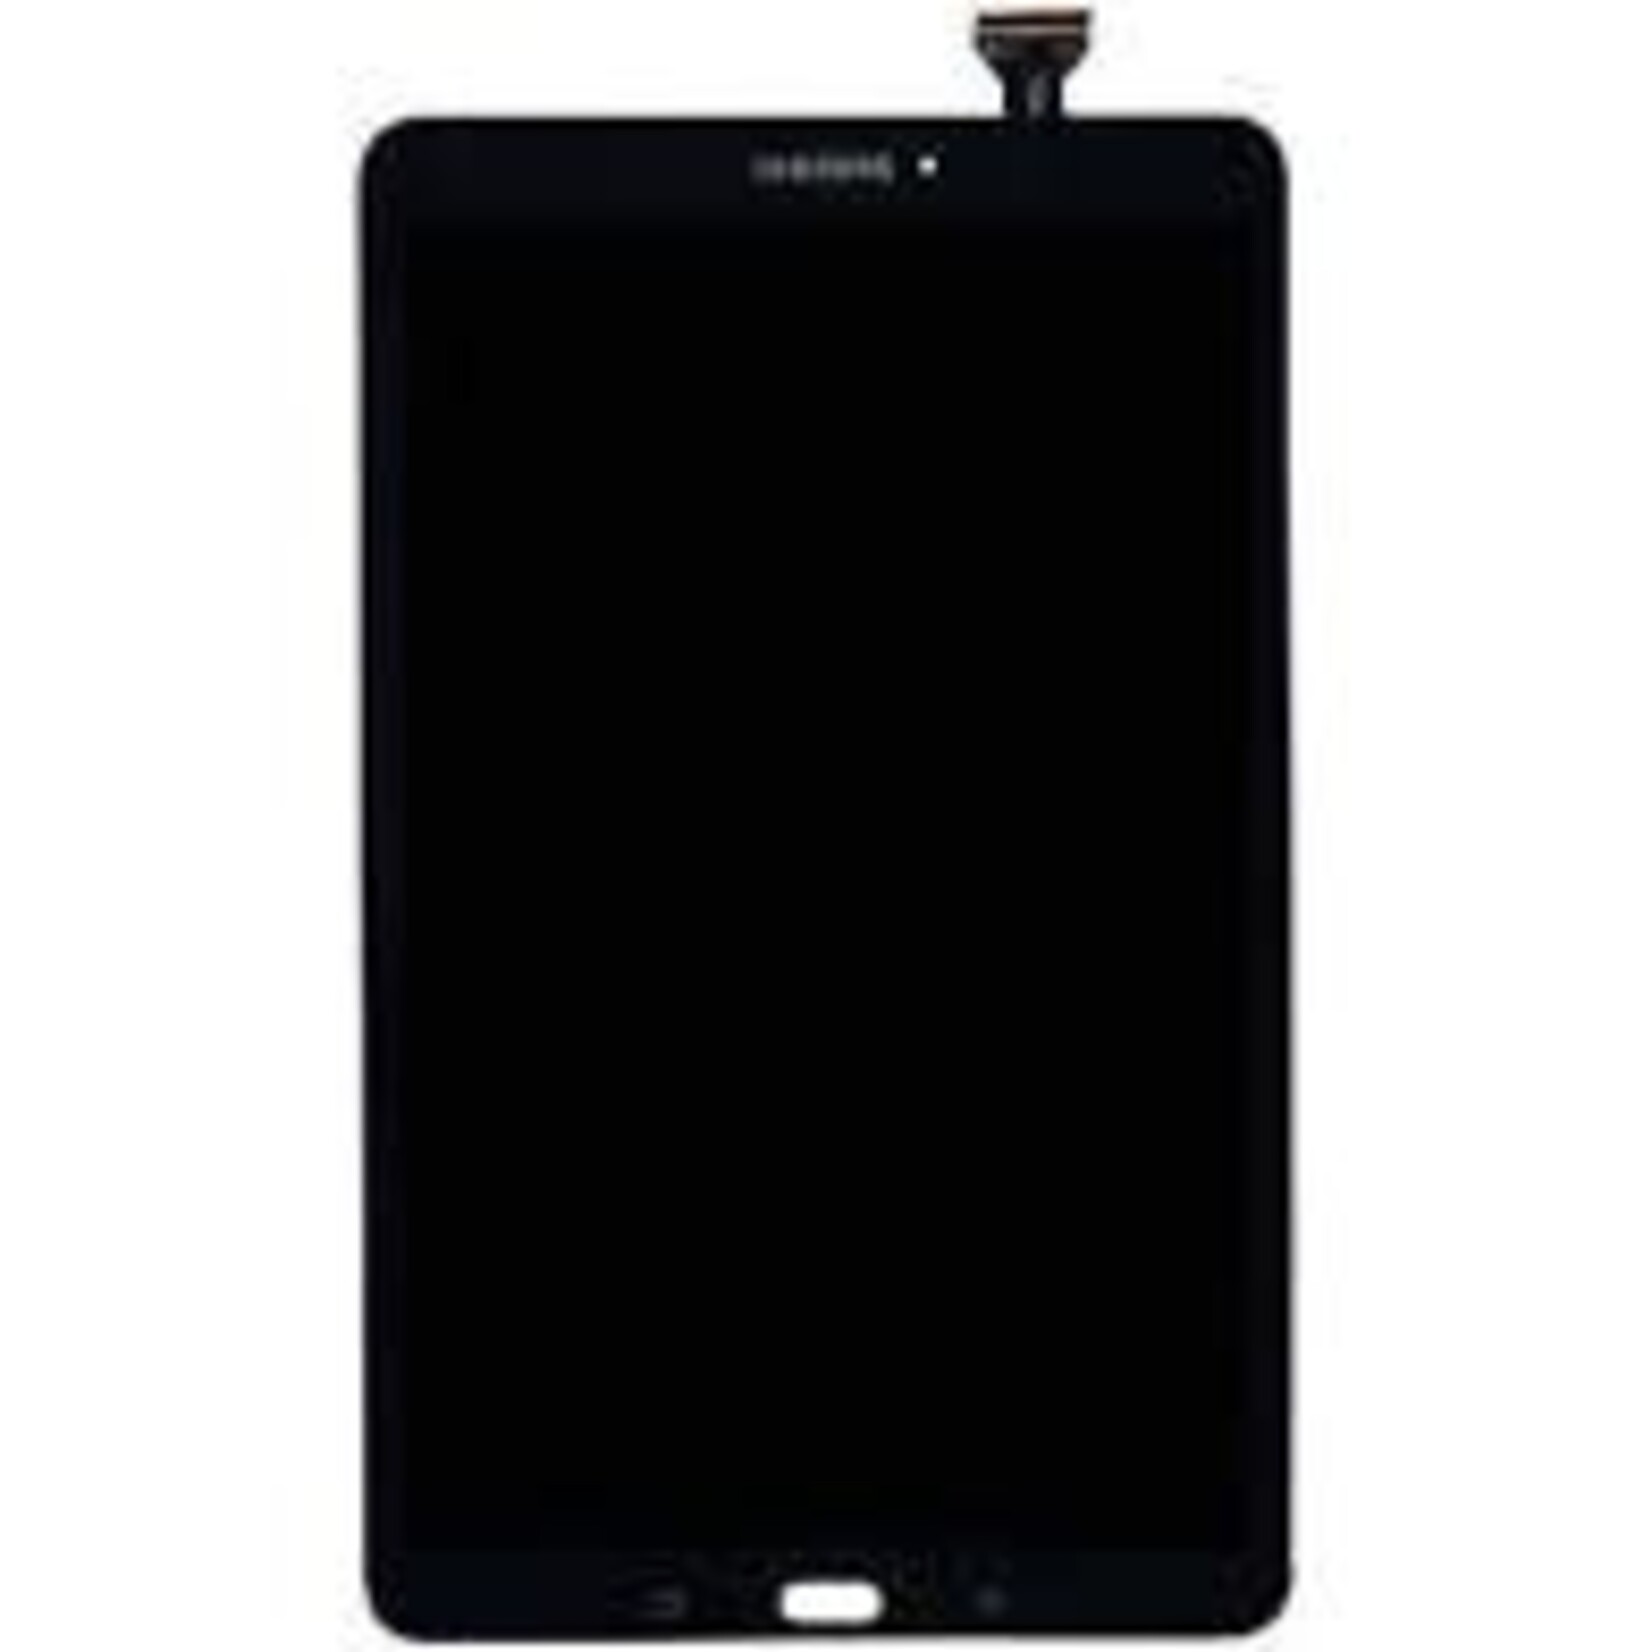 Samsung USAGÉ / USED - LCD DIGITIZER ASSEMBLY WITH FRAME T560 NOIR BLACK USED